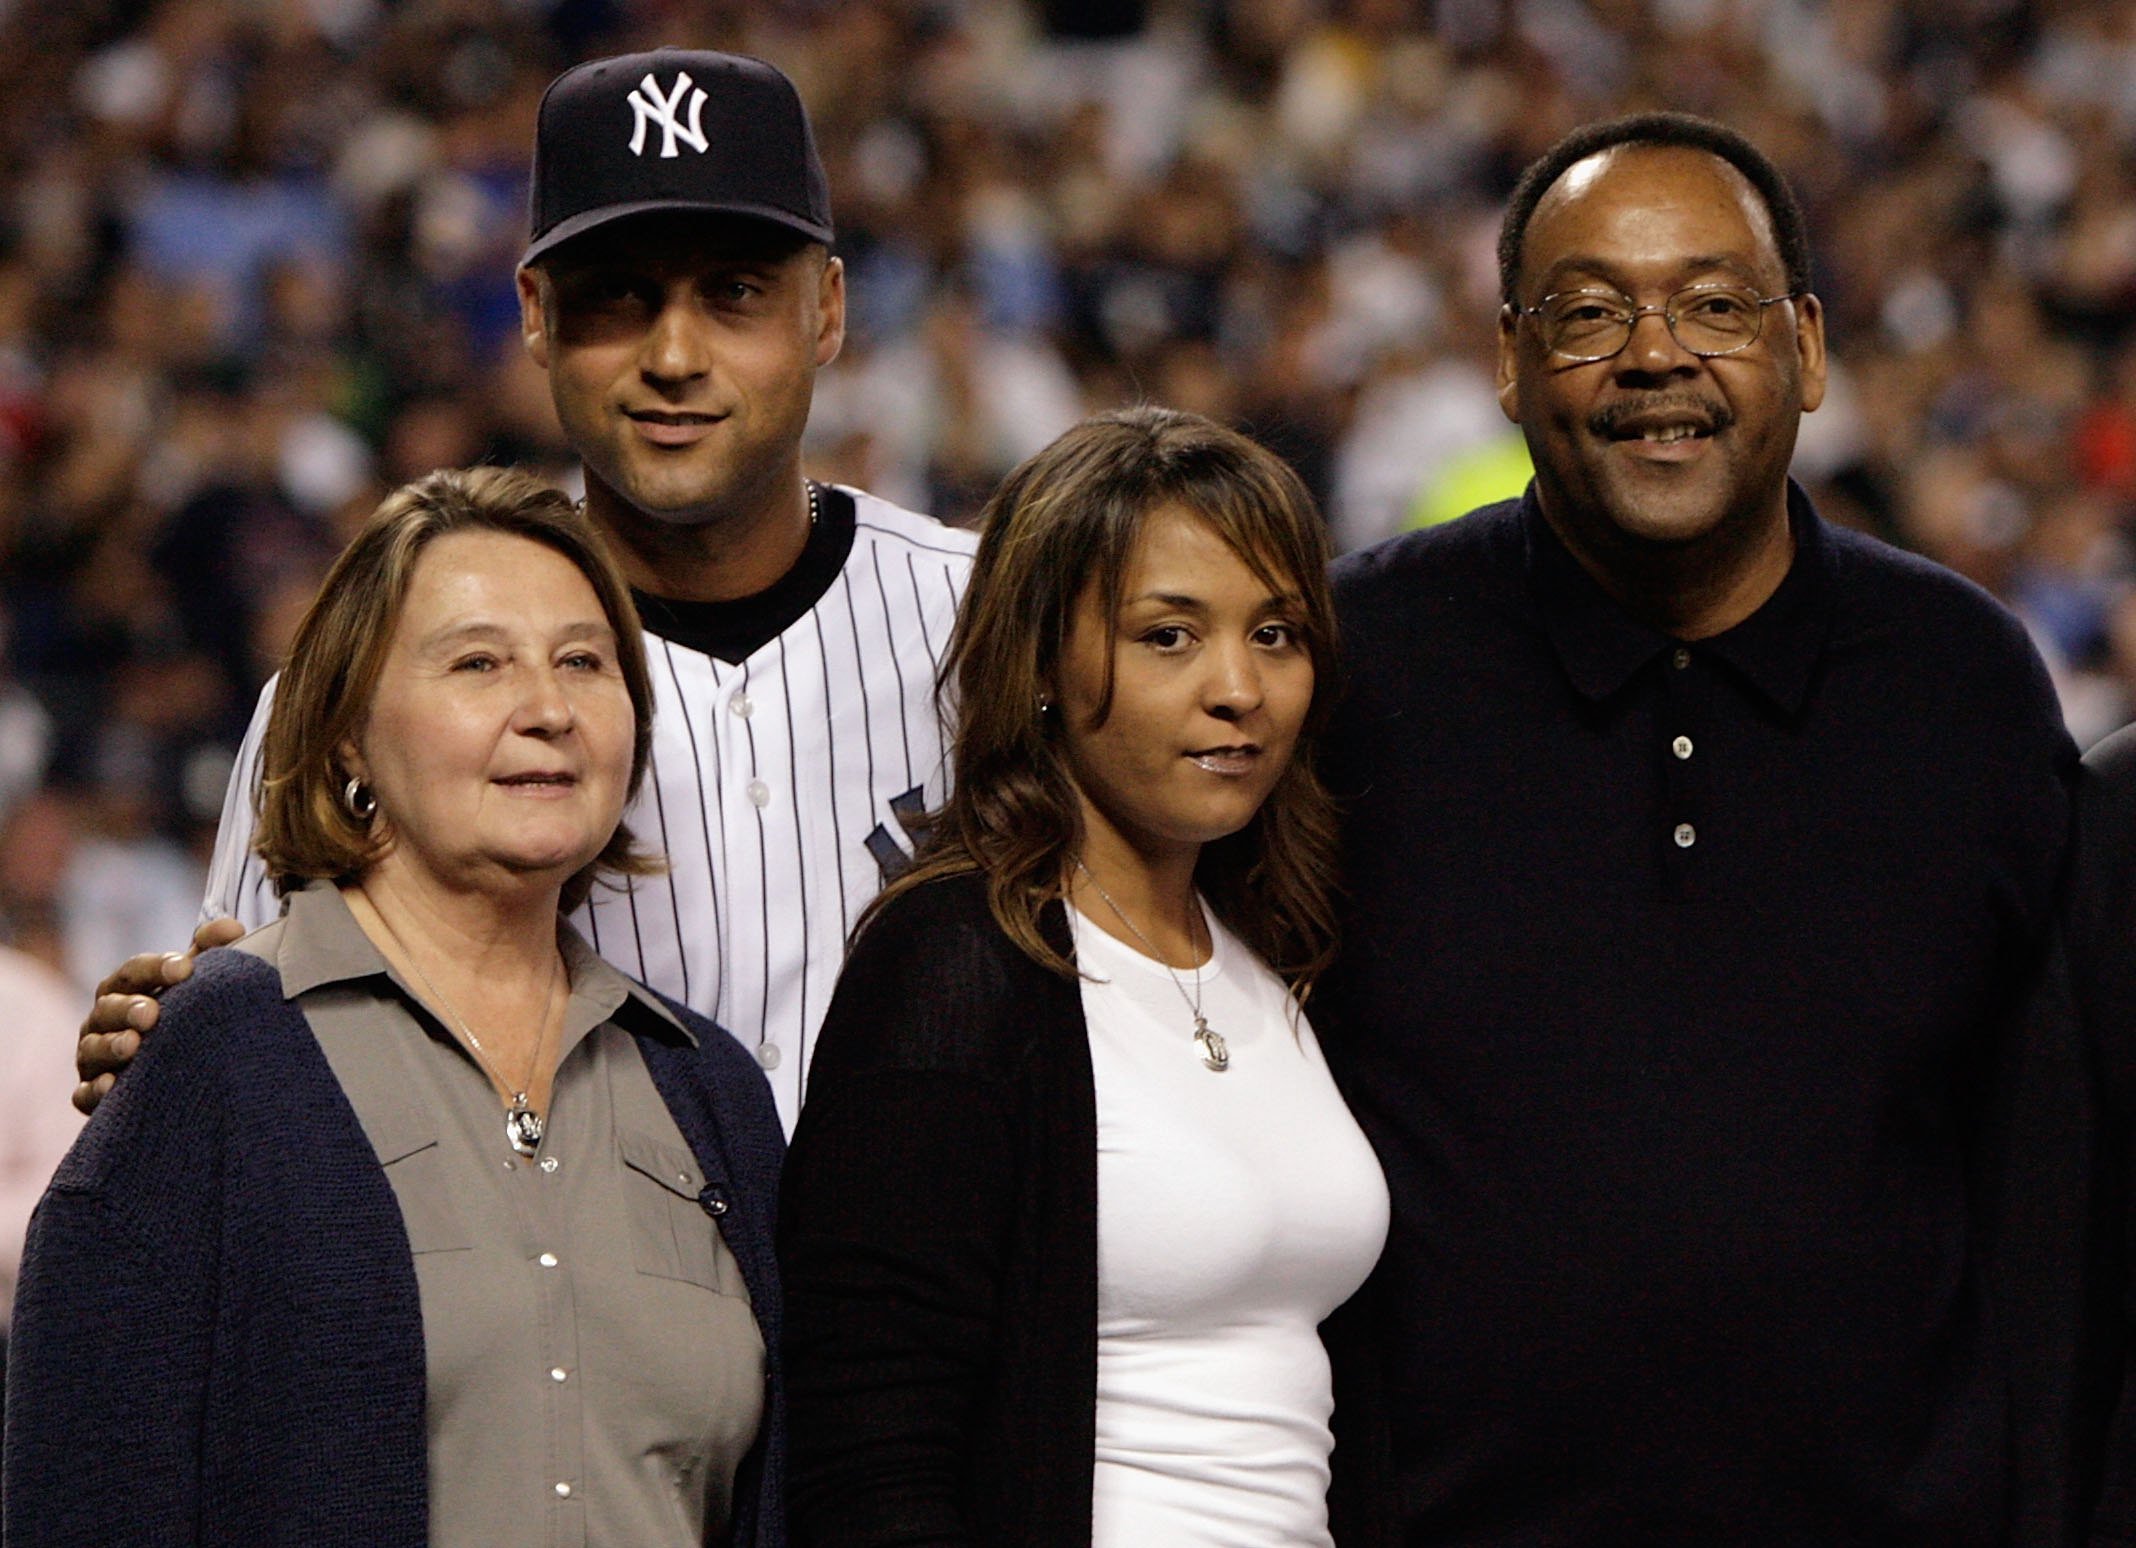 Charles and Dorothy Jeter with their children Derek and Sharlee Jeter at the New York Yankee Stadium on September 21, 2008, in New York City. | Source: Getty Images